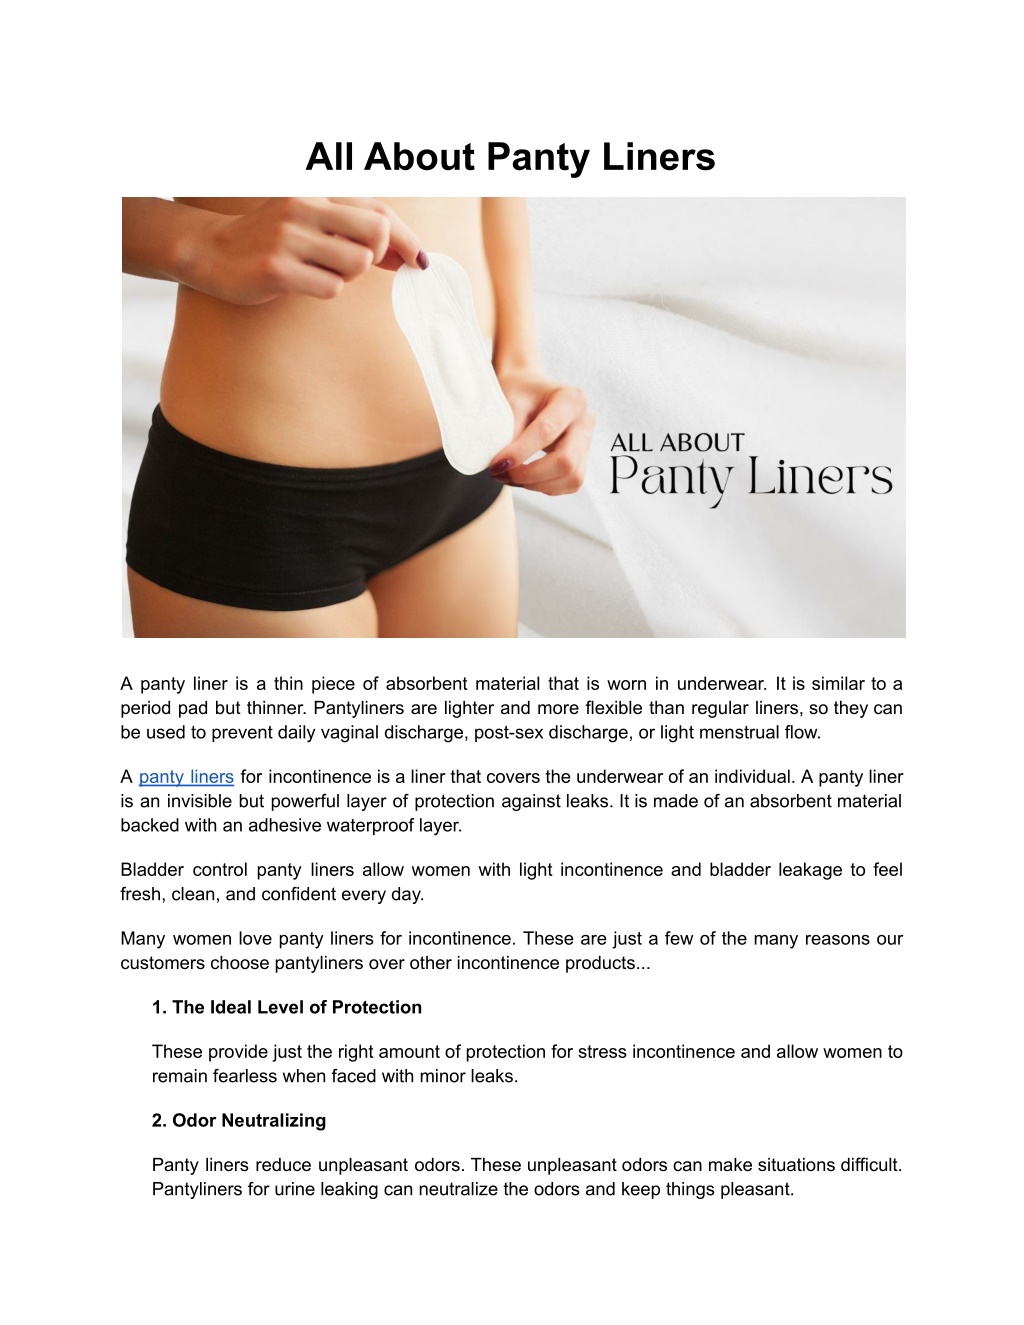 PPT - All About Panty Liners PowerPoint Presentation, free